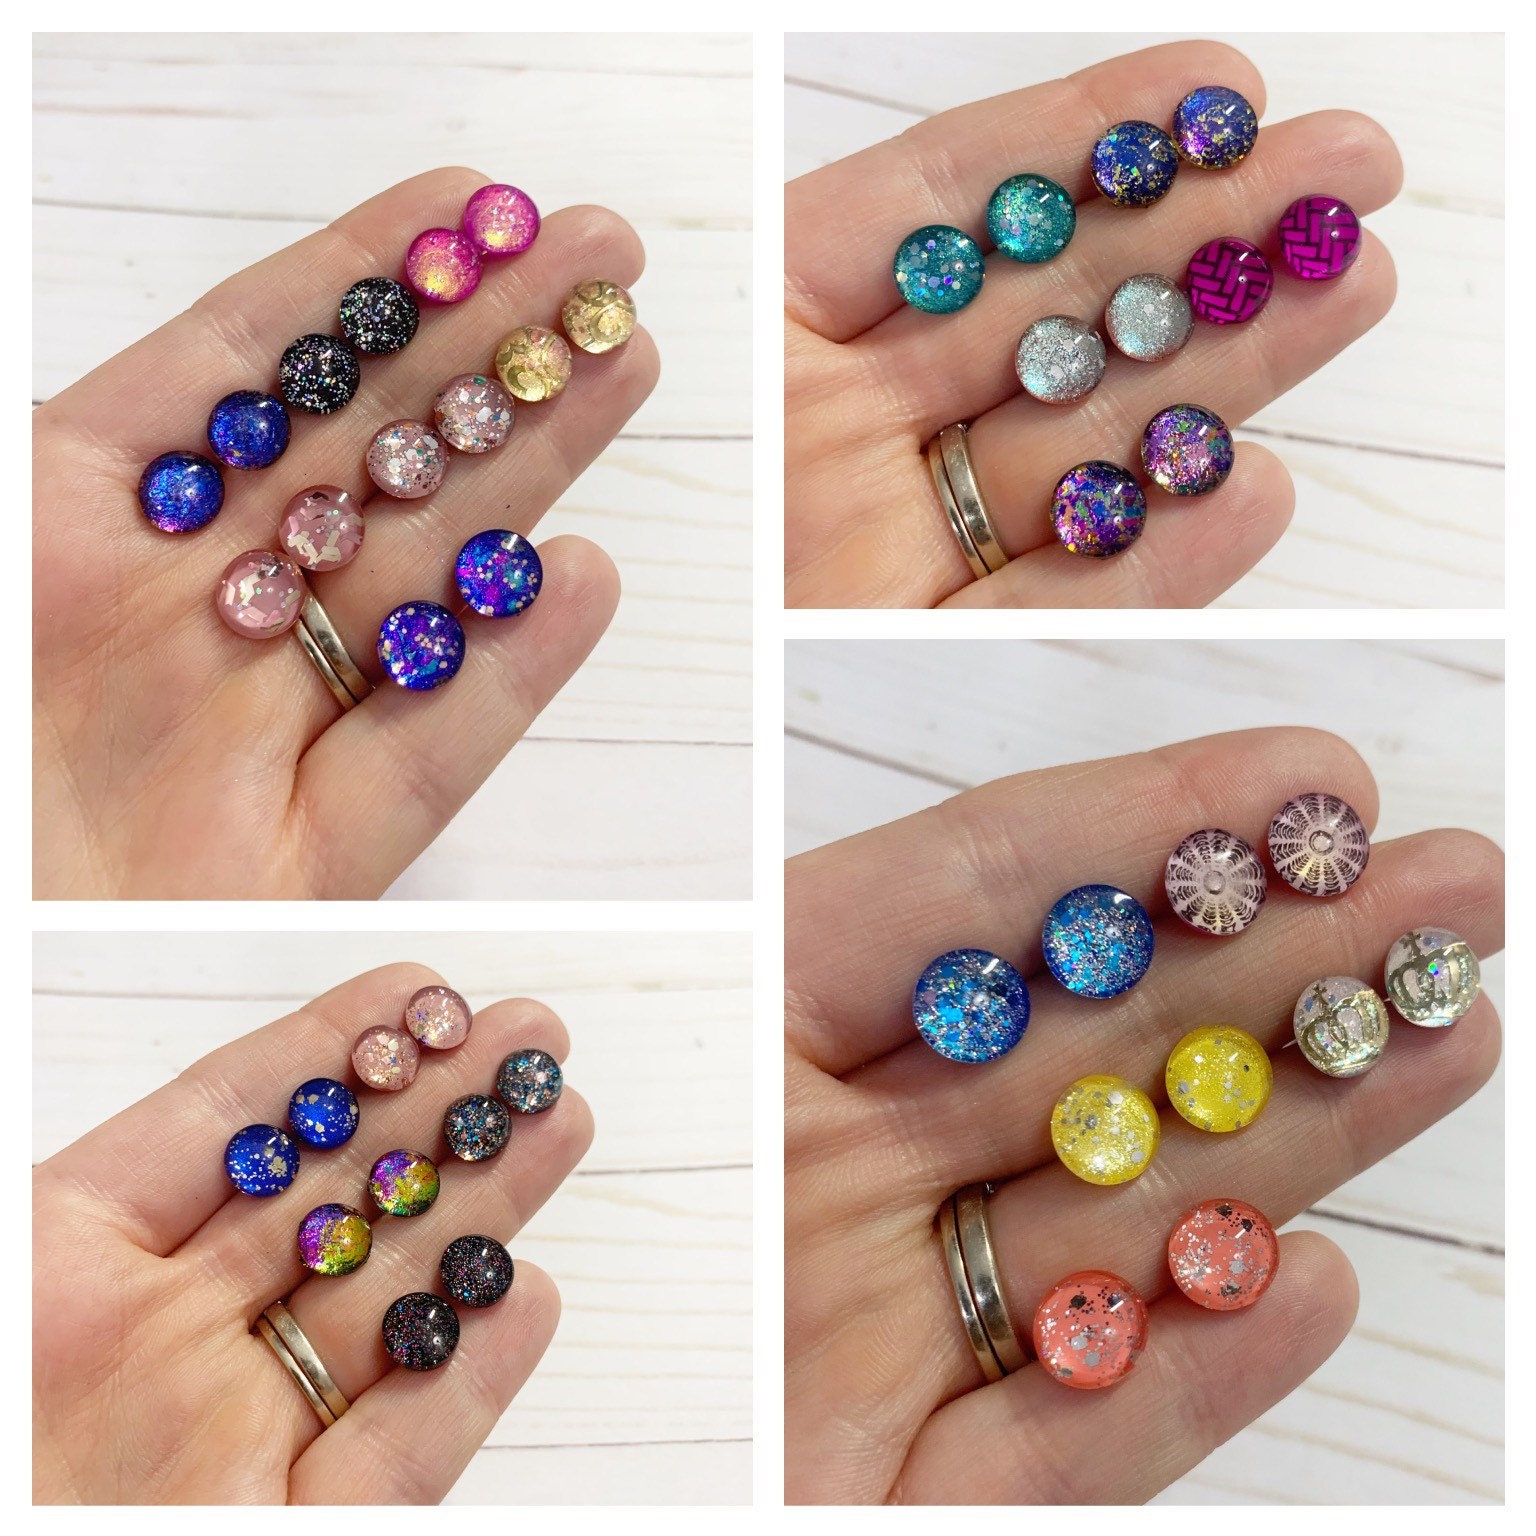 Random Selection, 3 Pairs of Plastic Post Studs, Rainbow Colors, Mixed 10mm  Round Hypoallergenic Stud Earrings, by Jules Jewelry Box 